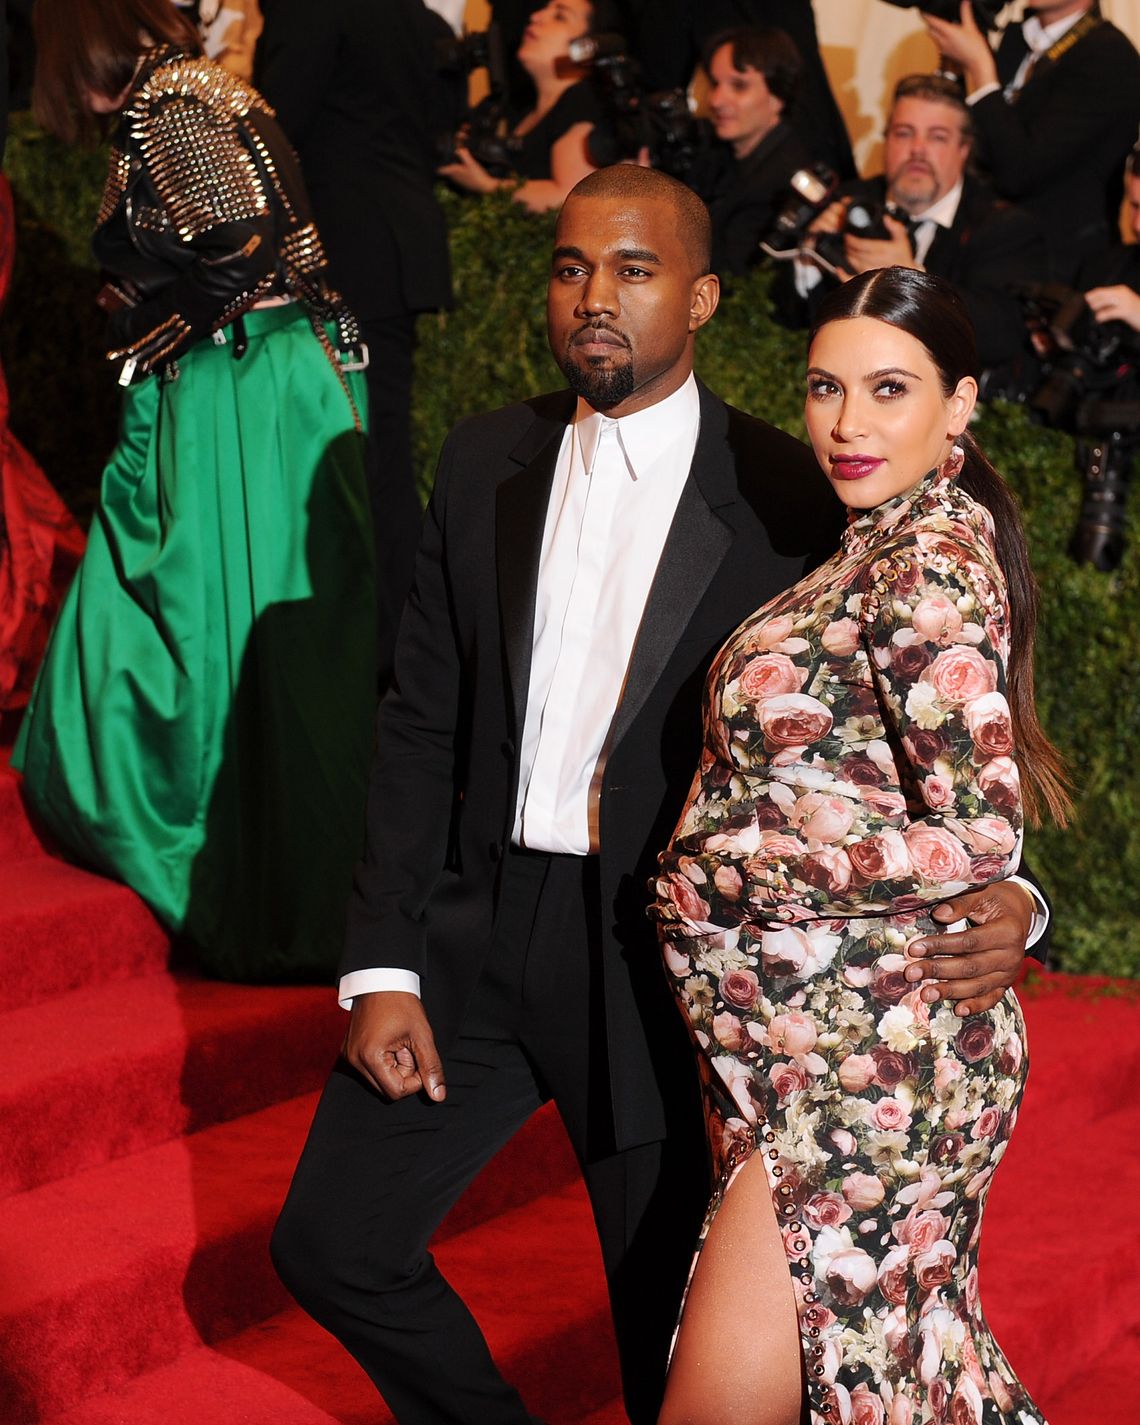 A history of Kanye West dressing the women he dates